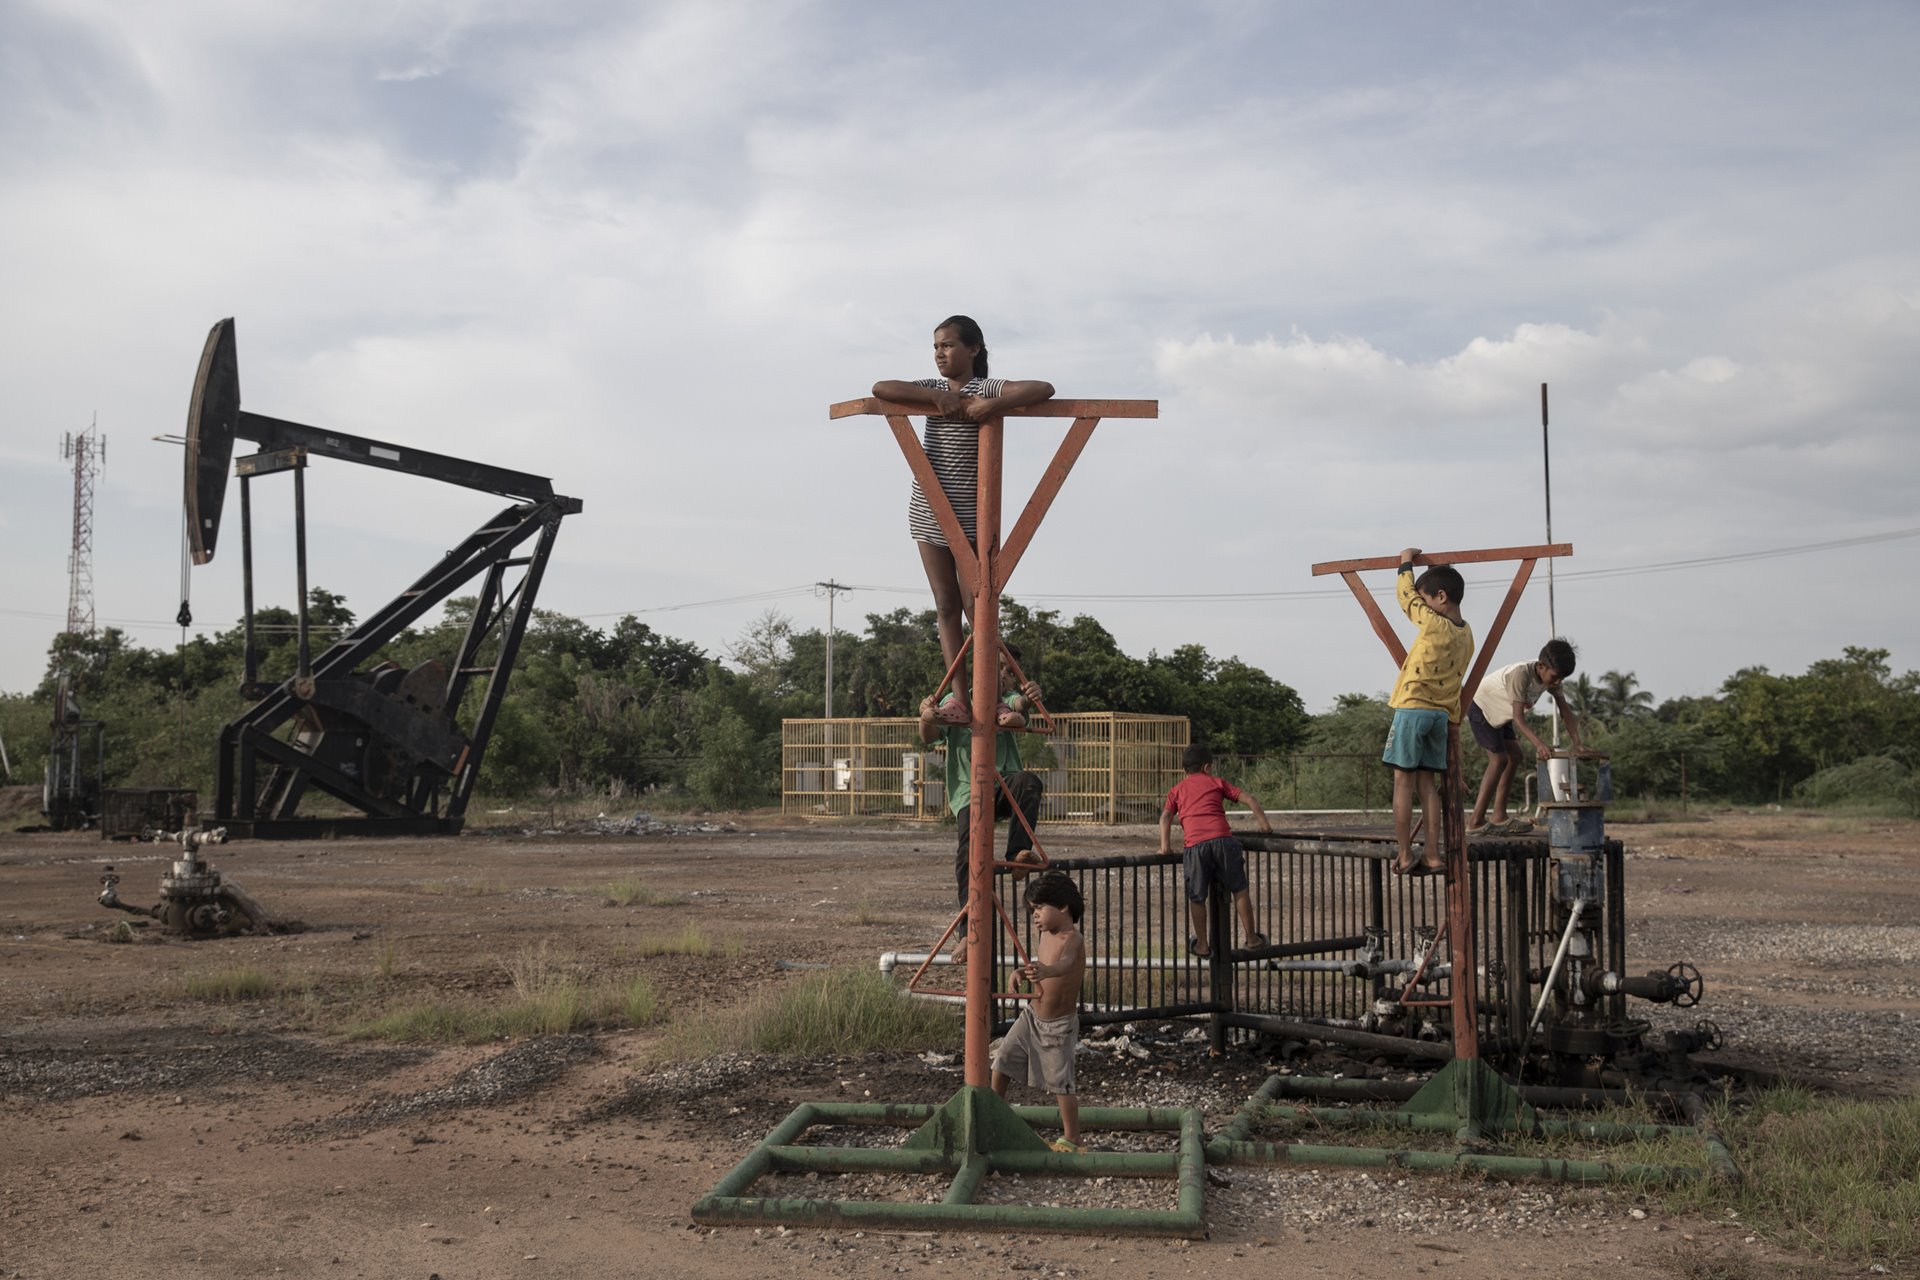 Children play on abandoned oil structures in Cabimas, on the shores of Lake Maracaibo, Zulia State, Venezuela. Crude oil and other pollutants spill into the lake, in which the children swim, from badly maintained equipment owned by state oil company PDVSA. Between 2010 and 2016, the company was responsible for more than 46,000 spills of crude and other pollutants, according to a study by PROVEA, a Caracas-based human rights group. PDVSA stopped releasing data in 2016, reporting 8,250 oil spills that year.